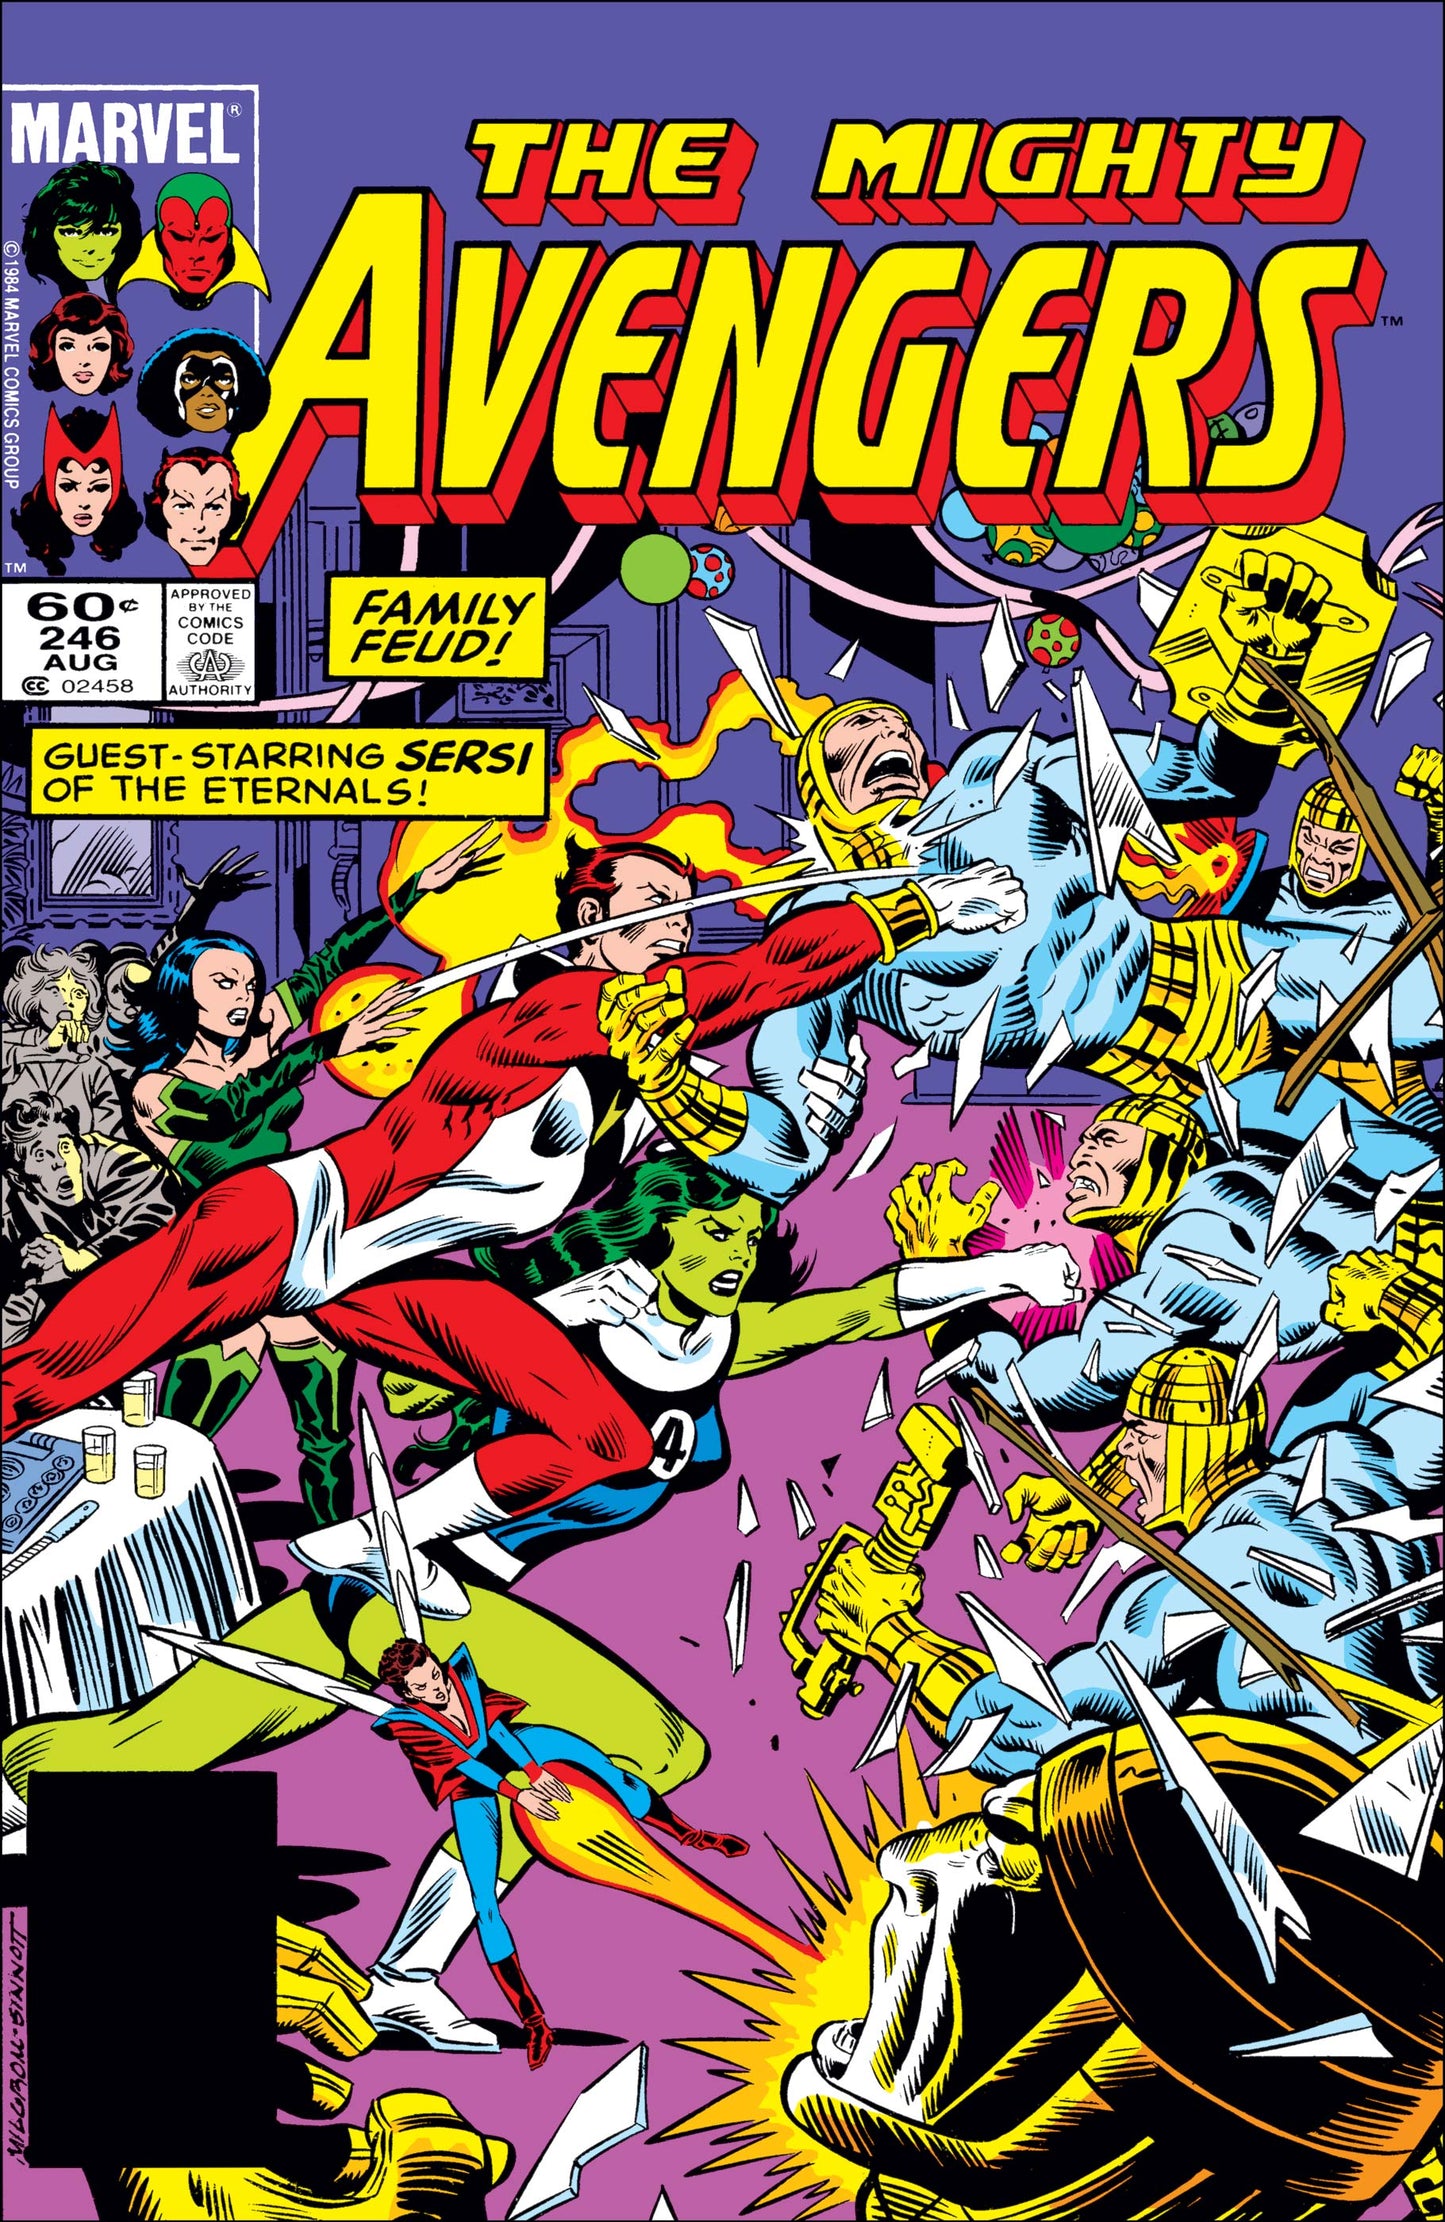 The Mighty Avengers #246